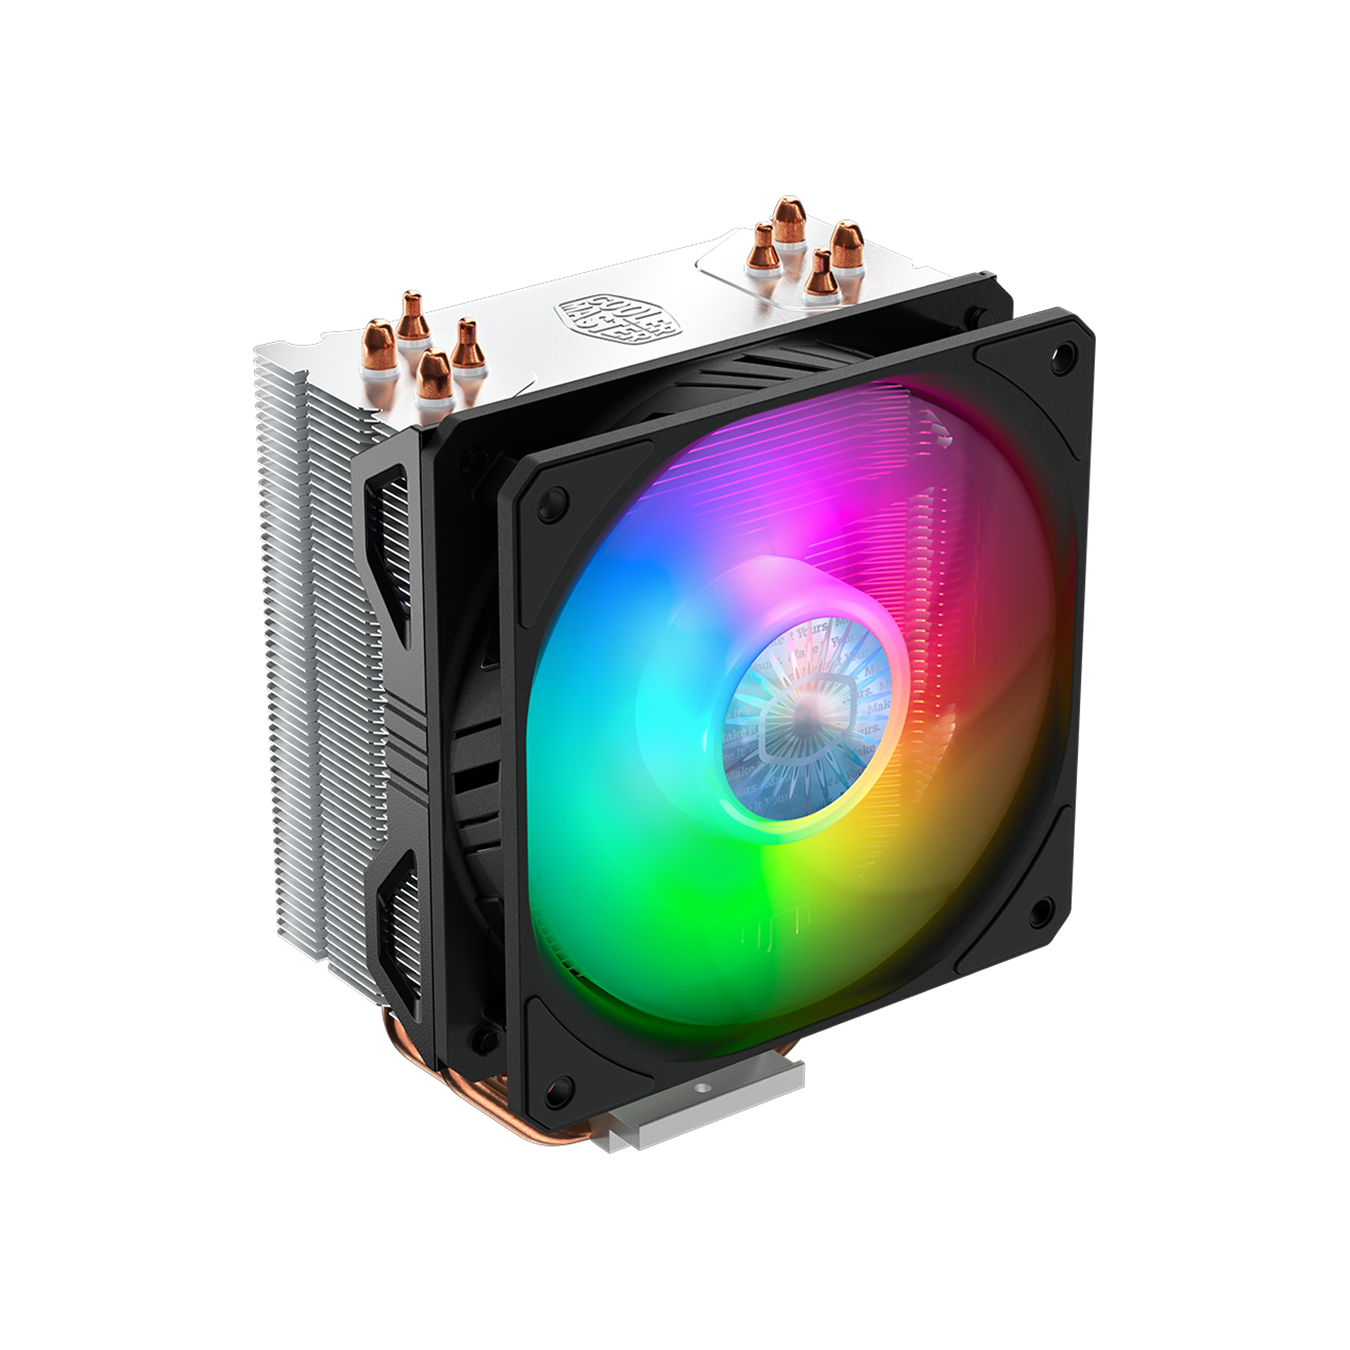 Hyper 212 Spectrum V2 - The new Spectrum 120 PWM fan boasts an upgraded fan blade and frame design to enhance cooling capabilities while maintaining silent operation. 